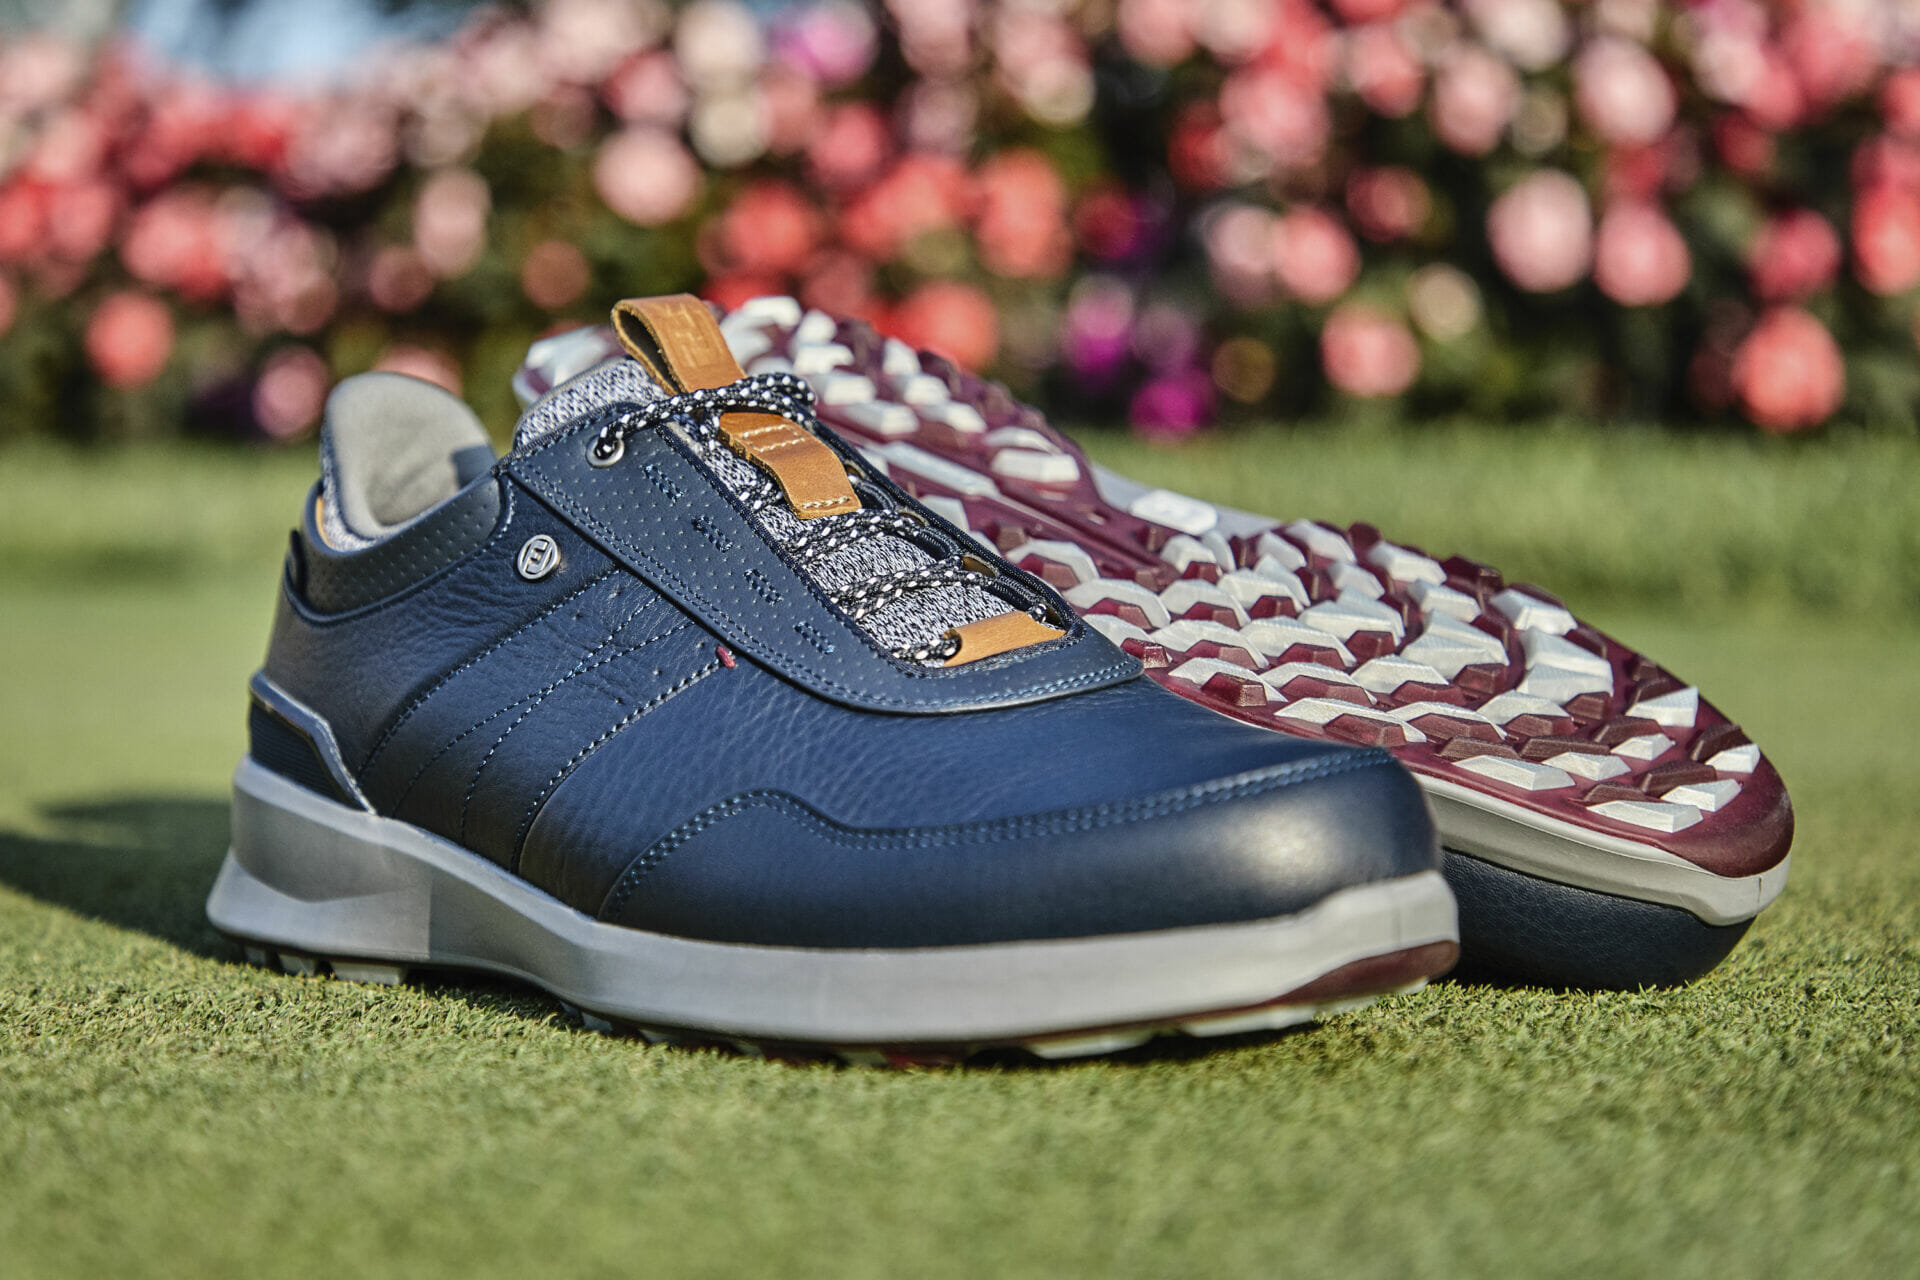 FootJoy launch its new Stratos shoe featuring unbeatable comfort on and off the course